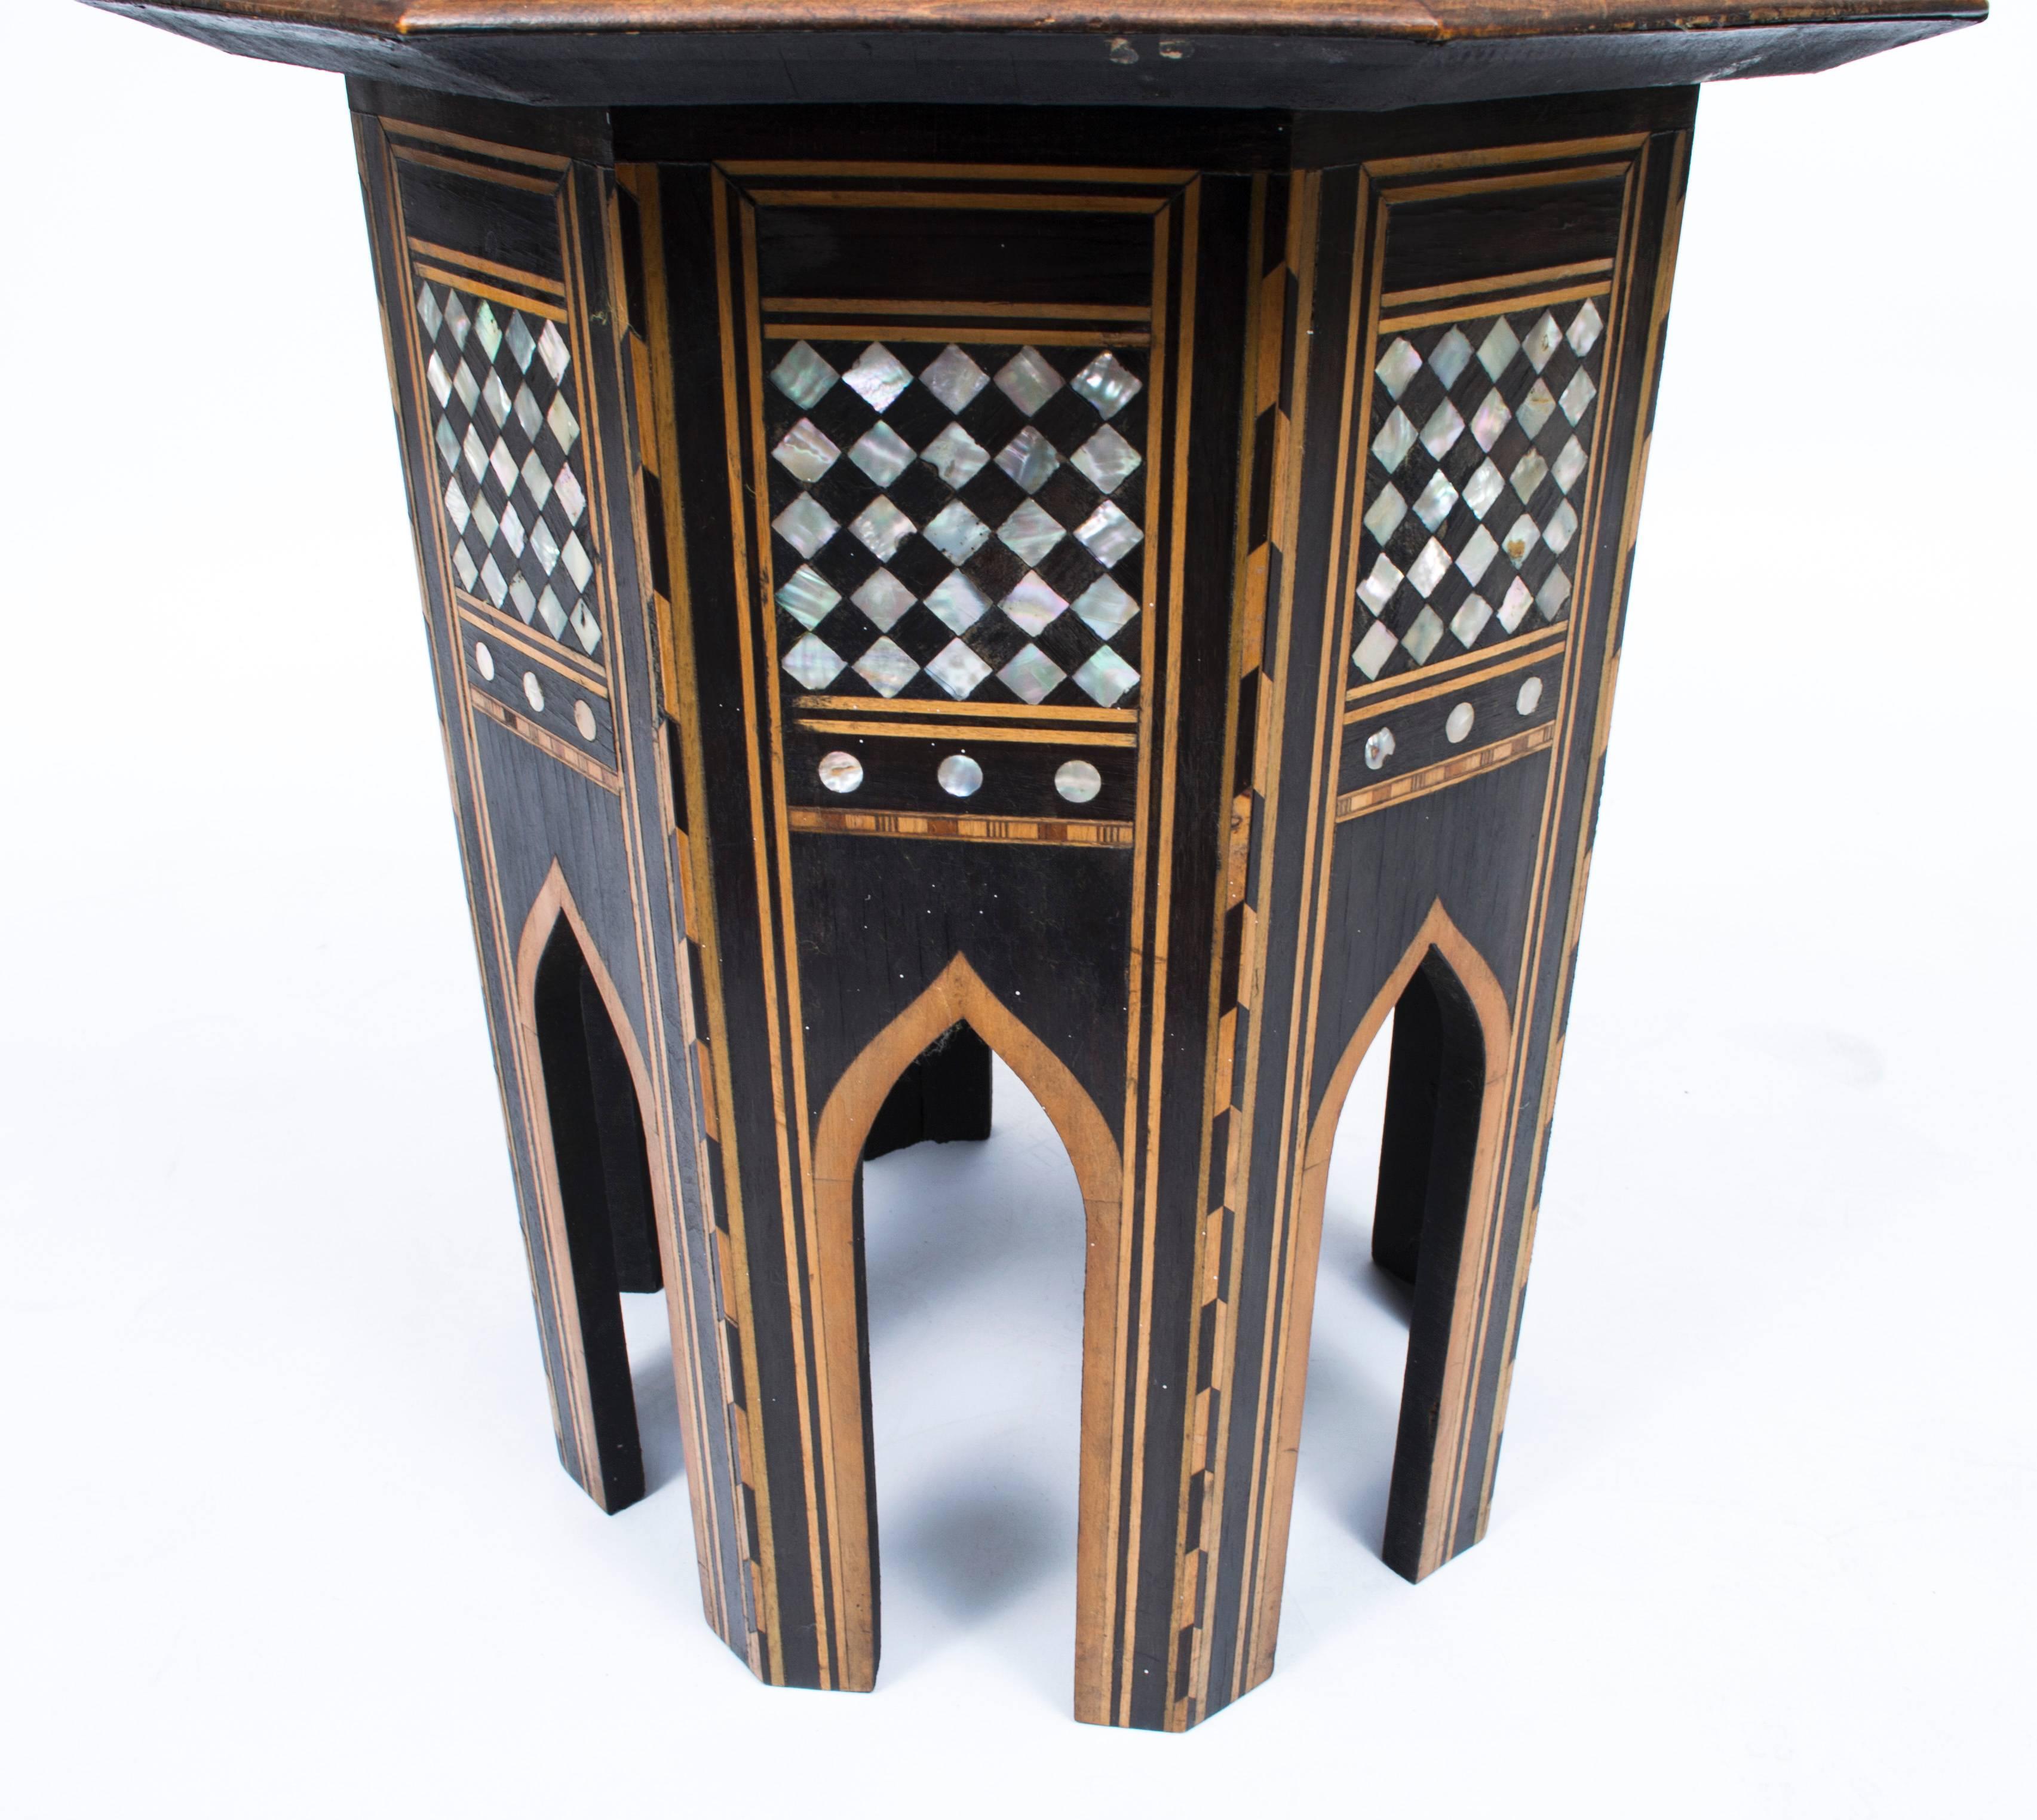 Early 20th Century Antique Persian Inlaid Octagonal Occasional Table, circa 1900